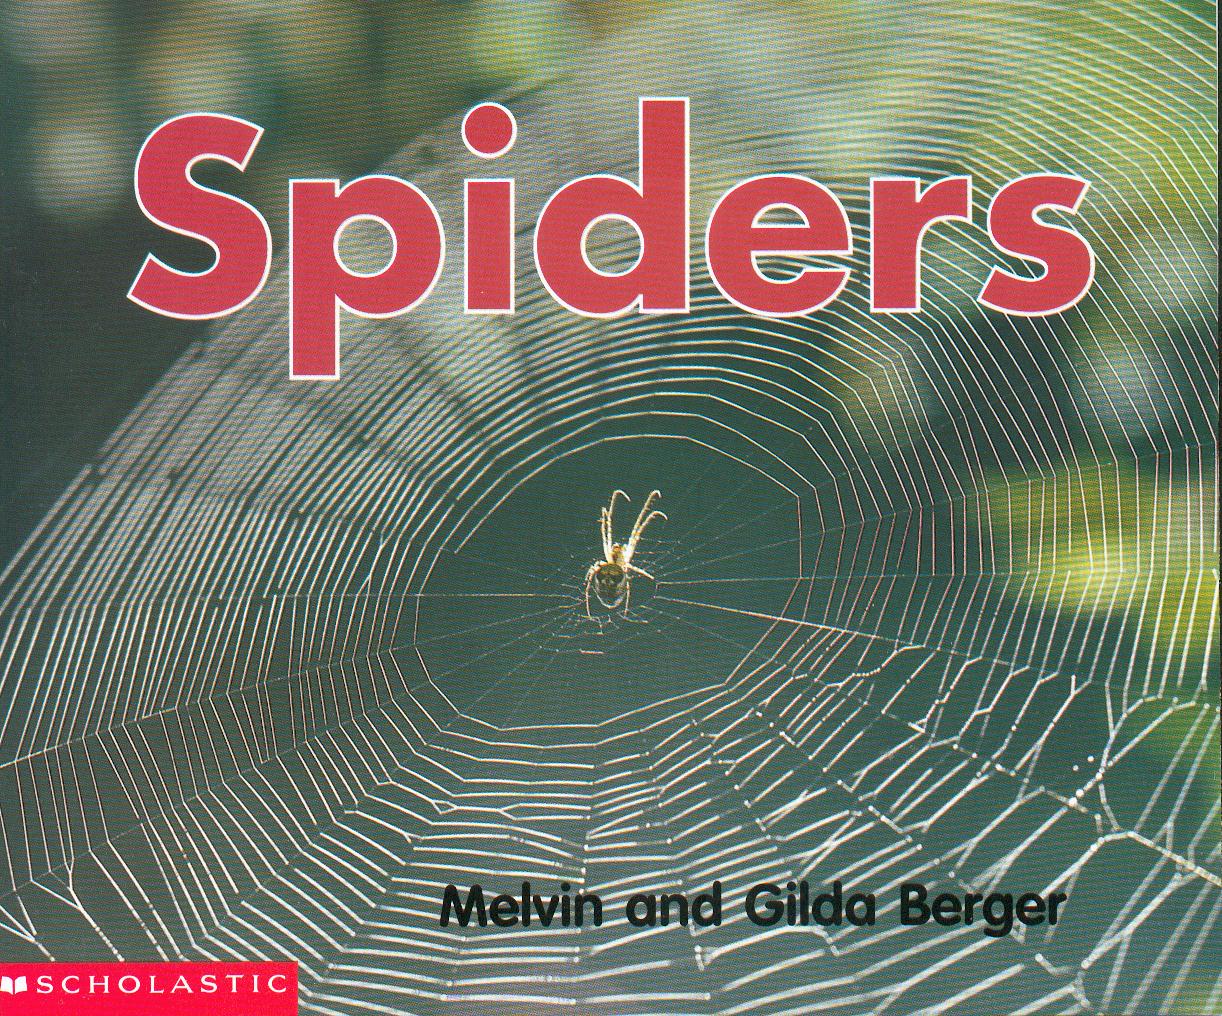 Spiders / Melvin and Gilda Berger.